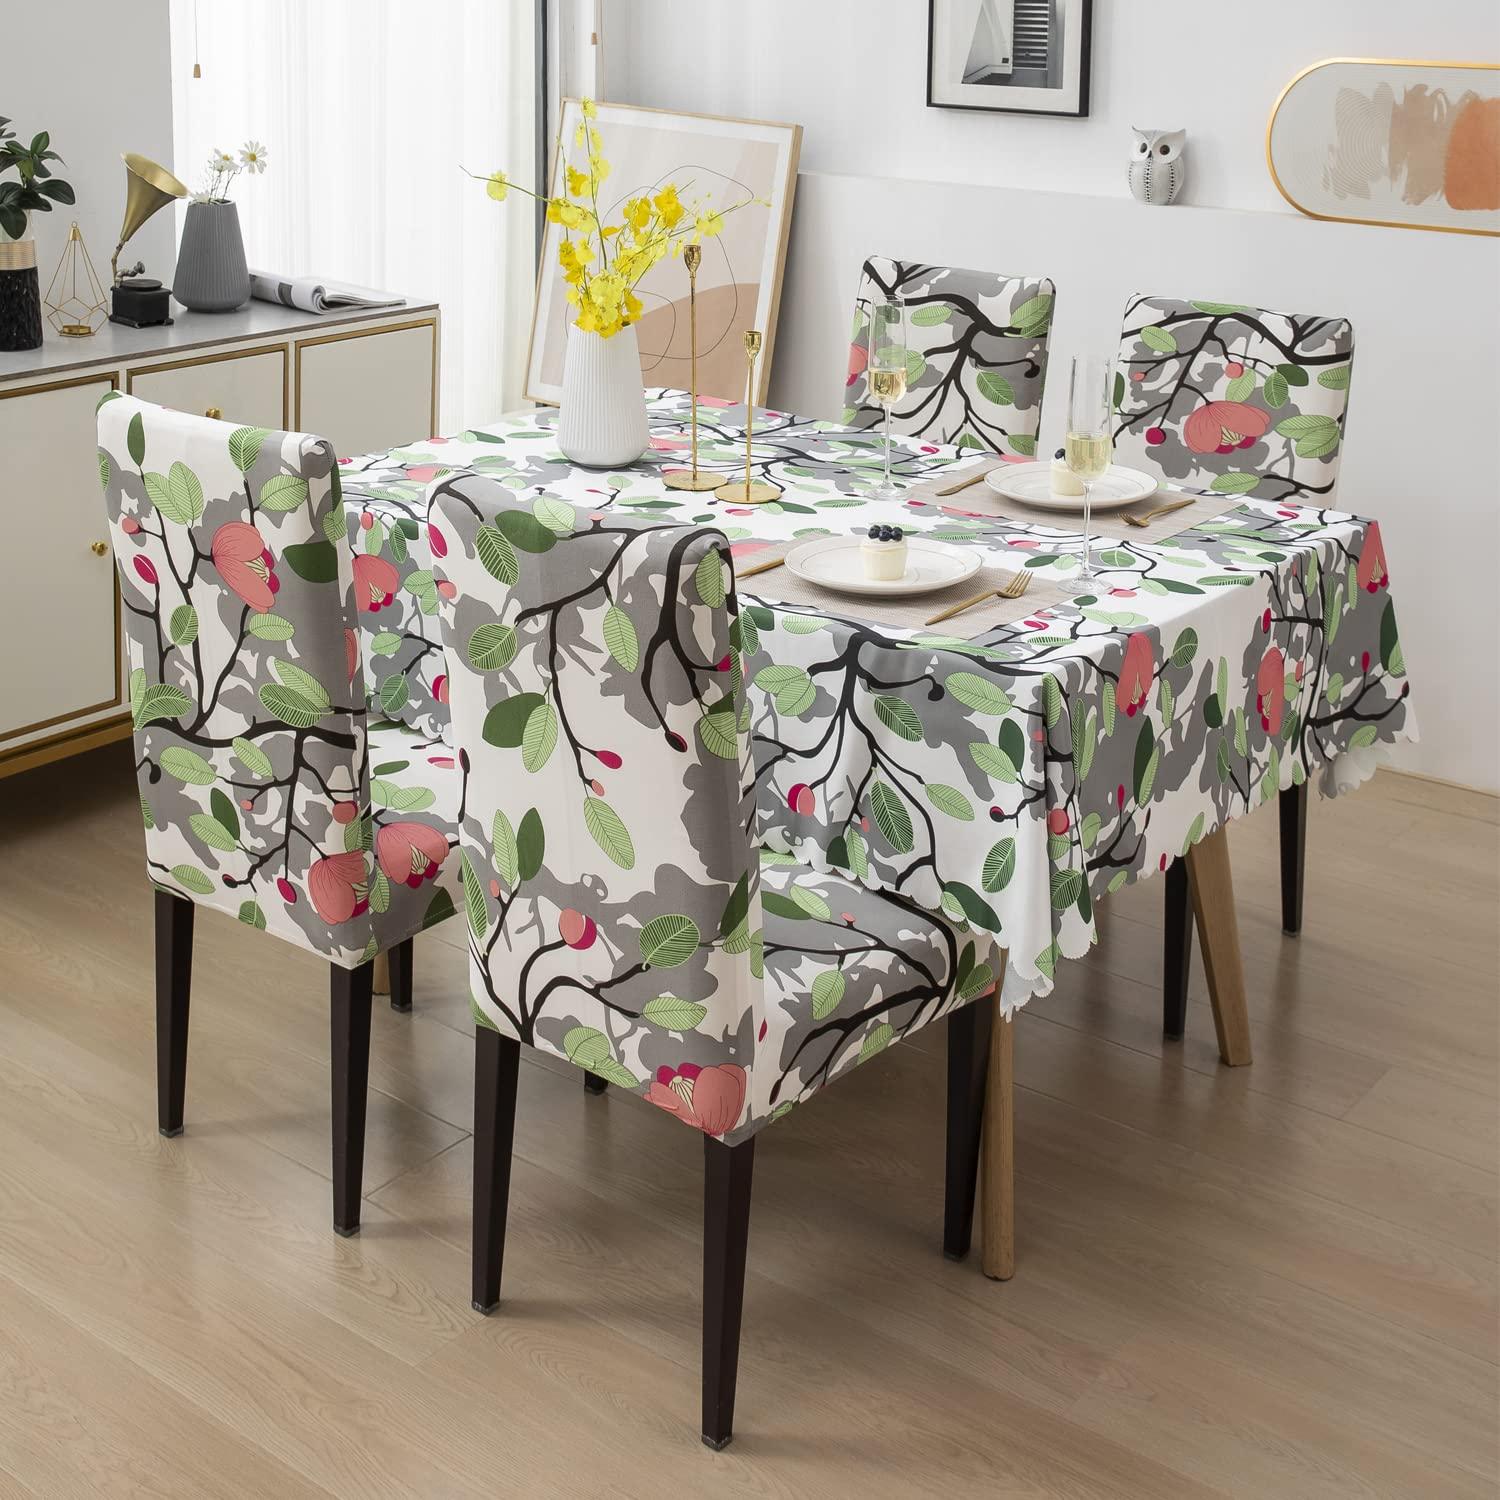 Premium Dining Table & Chair Cover Combo - Branch White